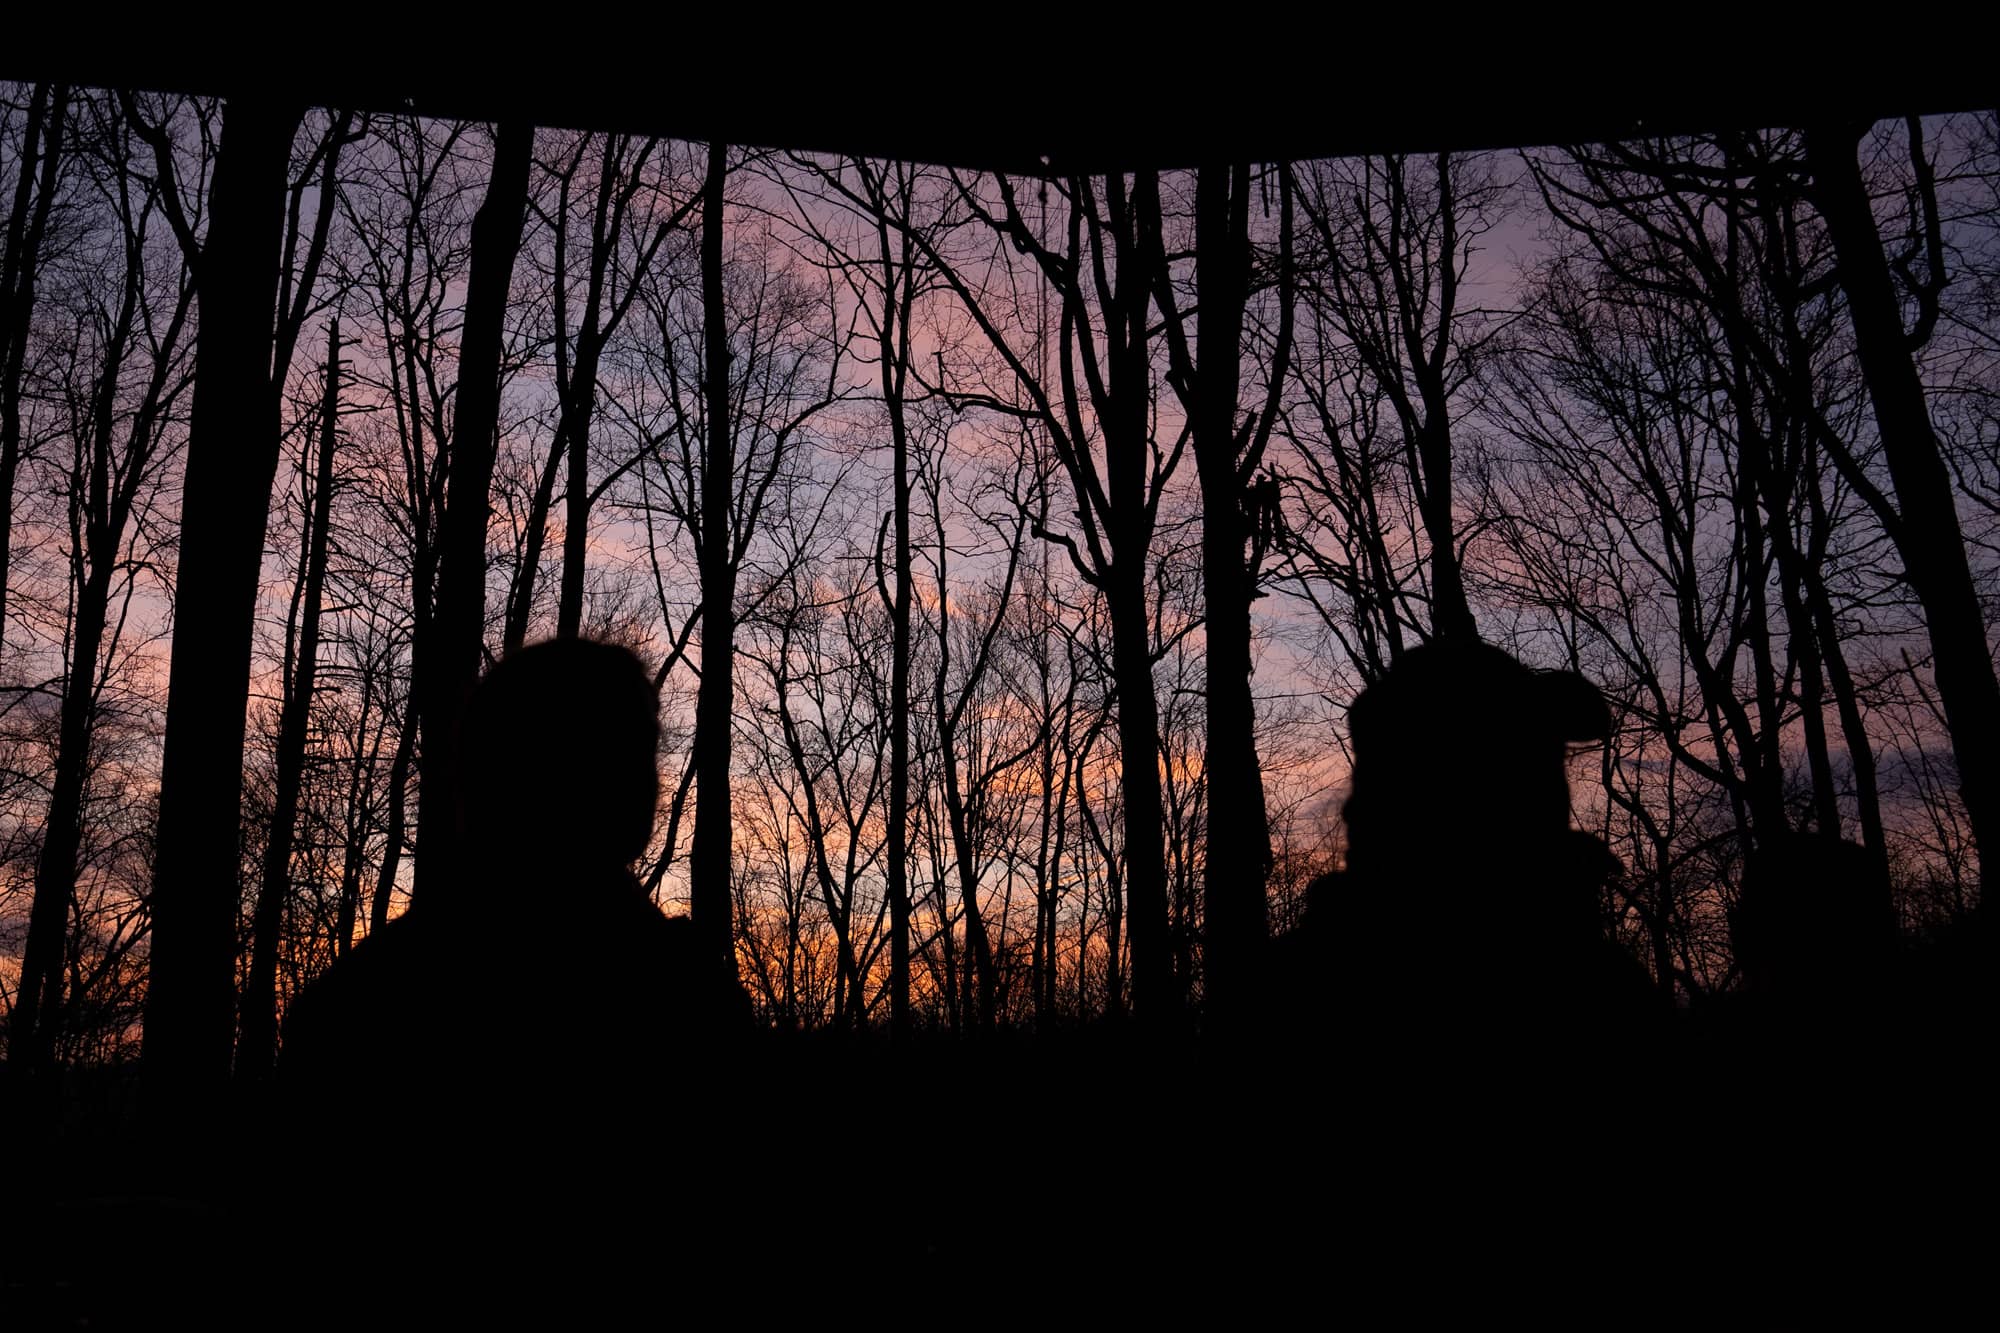 Ohio University students wait for dinner to be ready as the sun sets during their first day backpacking a section of the Appalachian Trail in the Nantahala National Forest on Saturday, March 5, 2022, at the Rock Gap Shelter near Franklin, North Carolina.